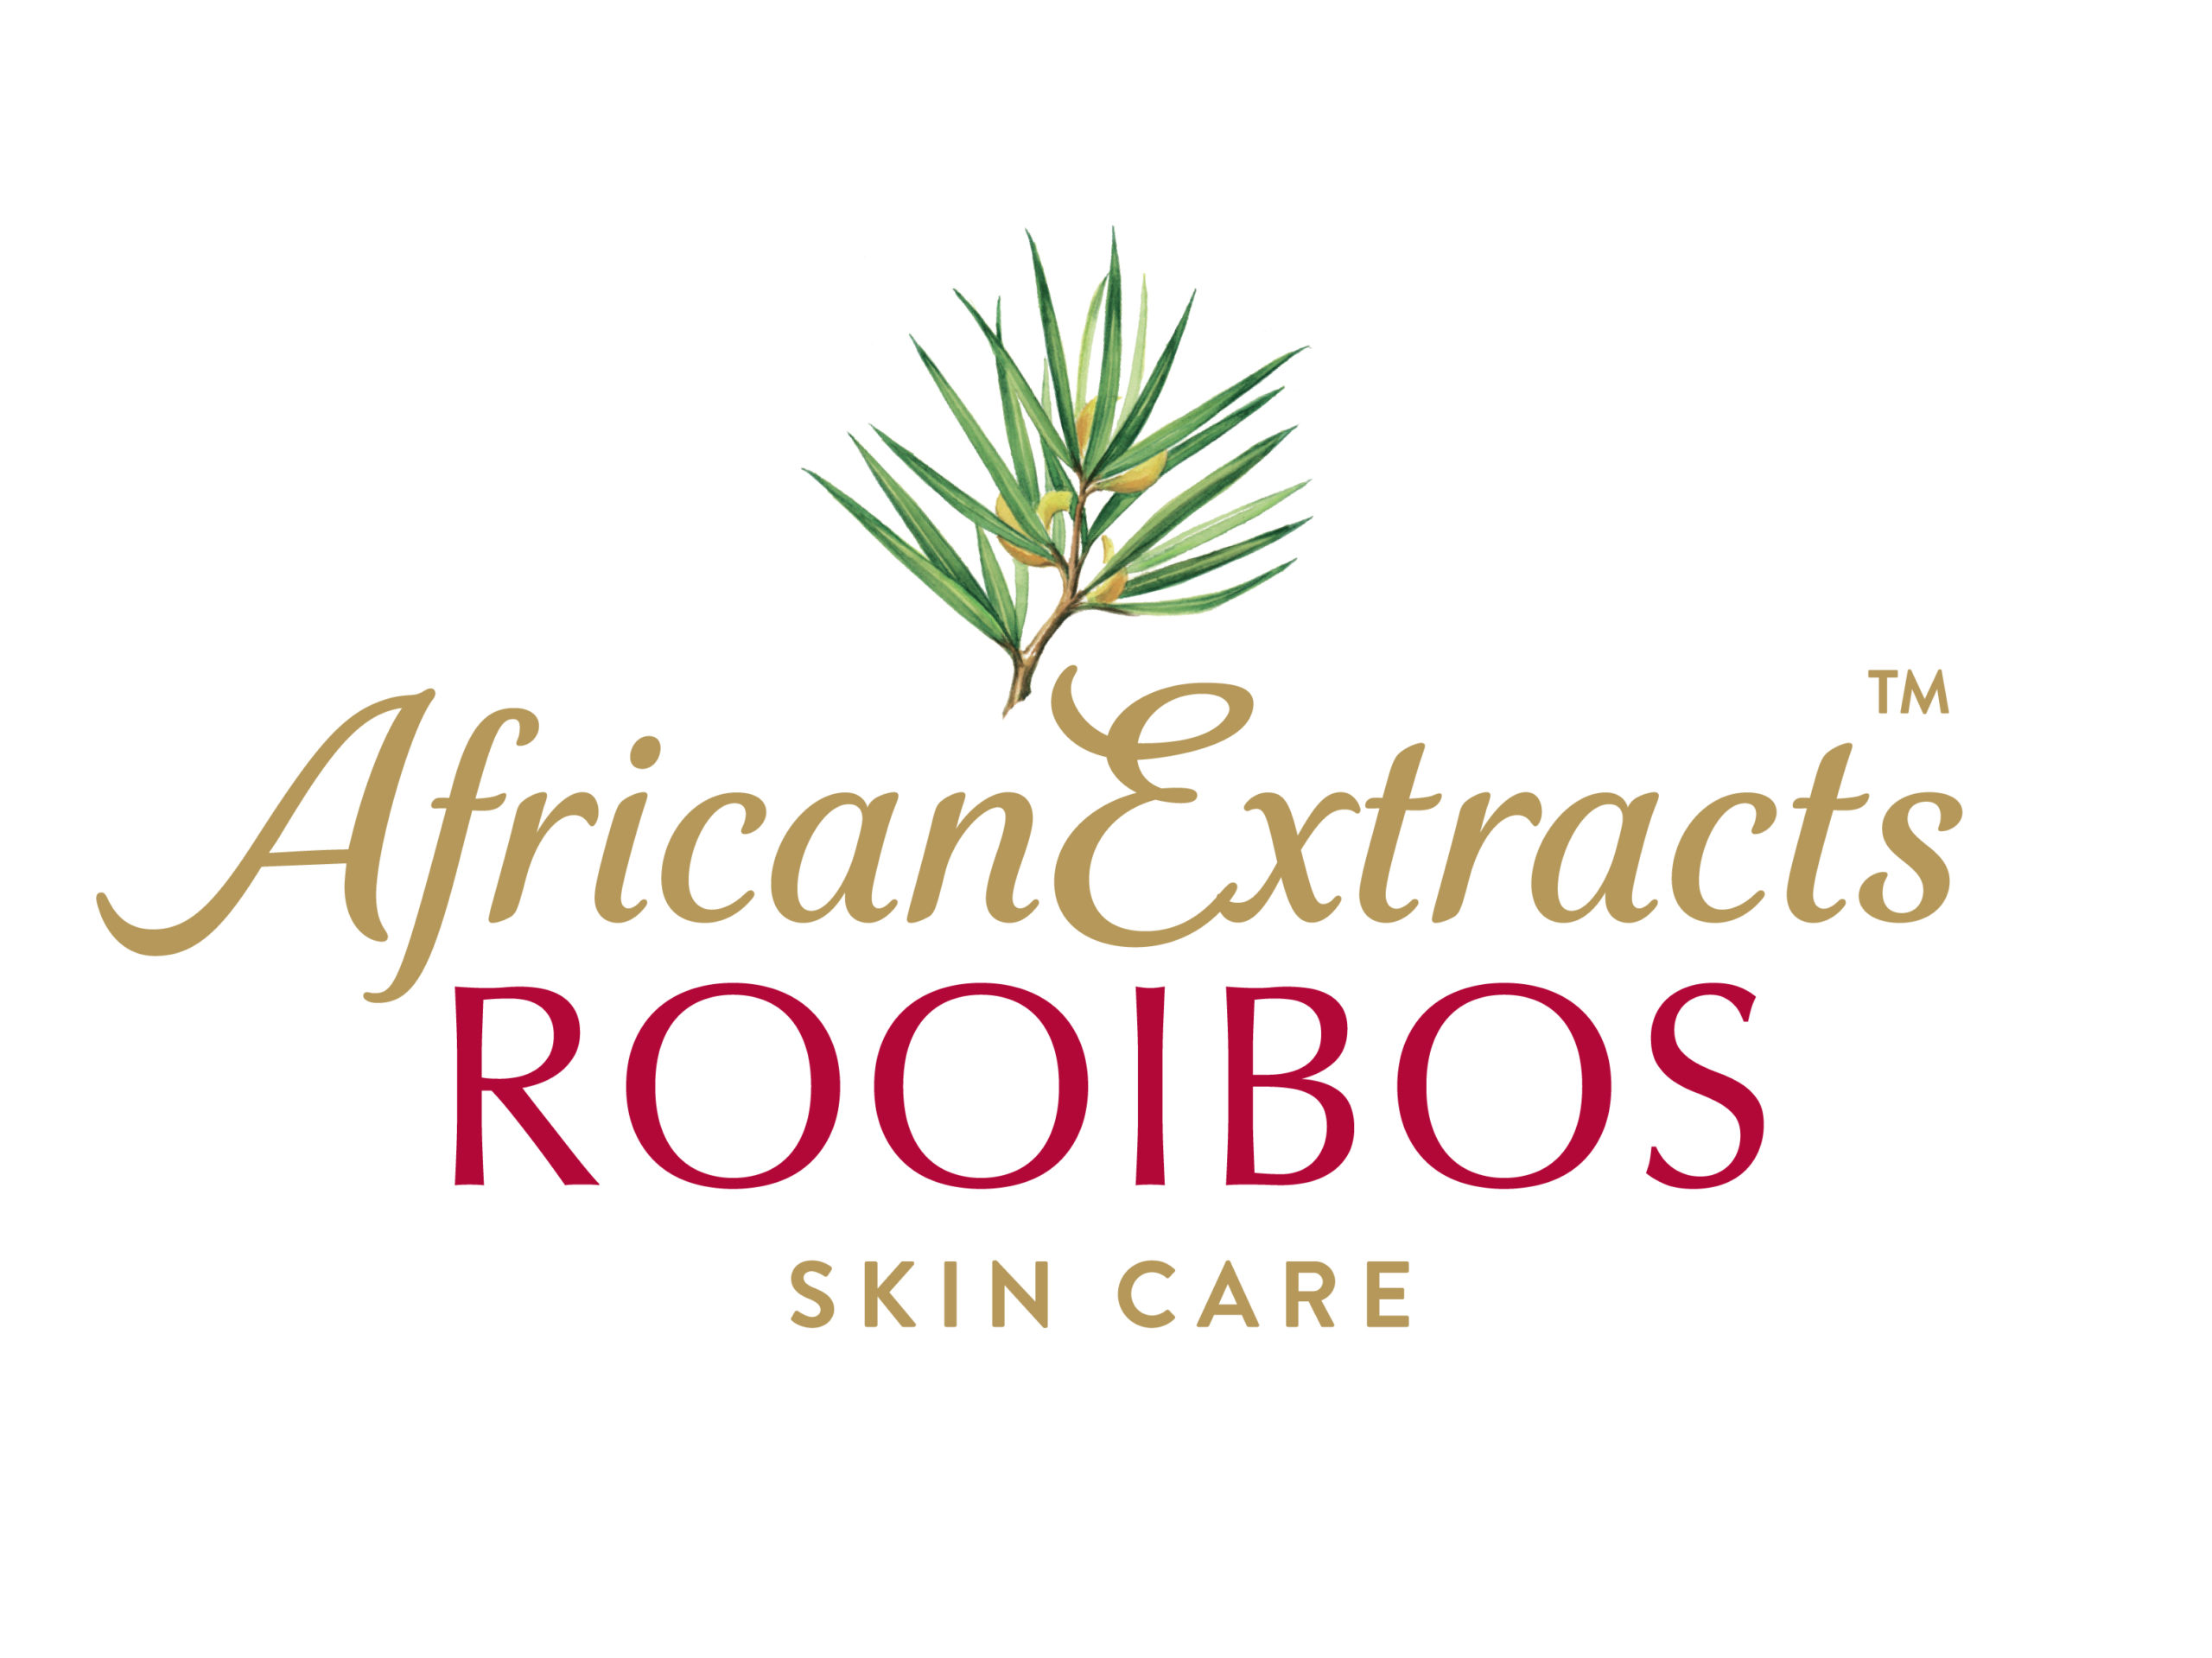 African Extracts